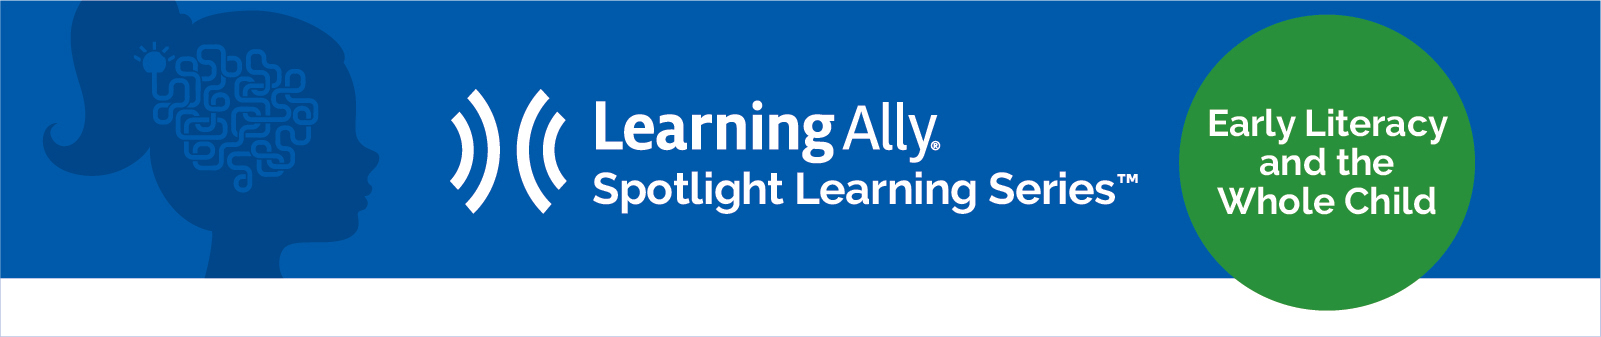 Spotlight Learning Conference: Focus on Early Literacy logo